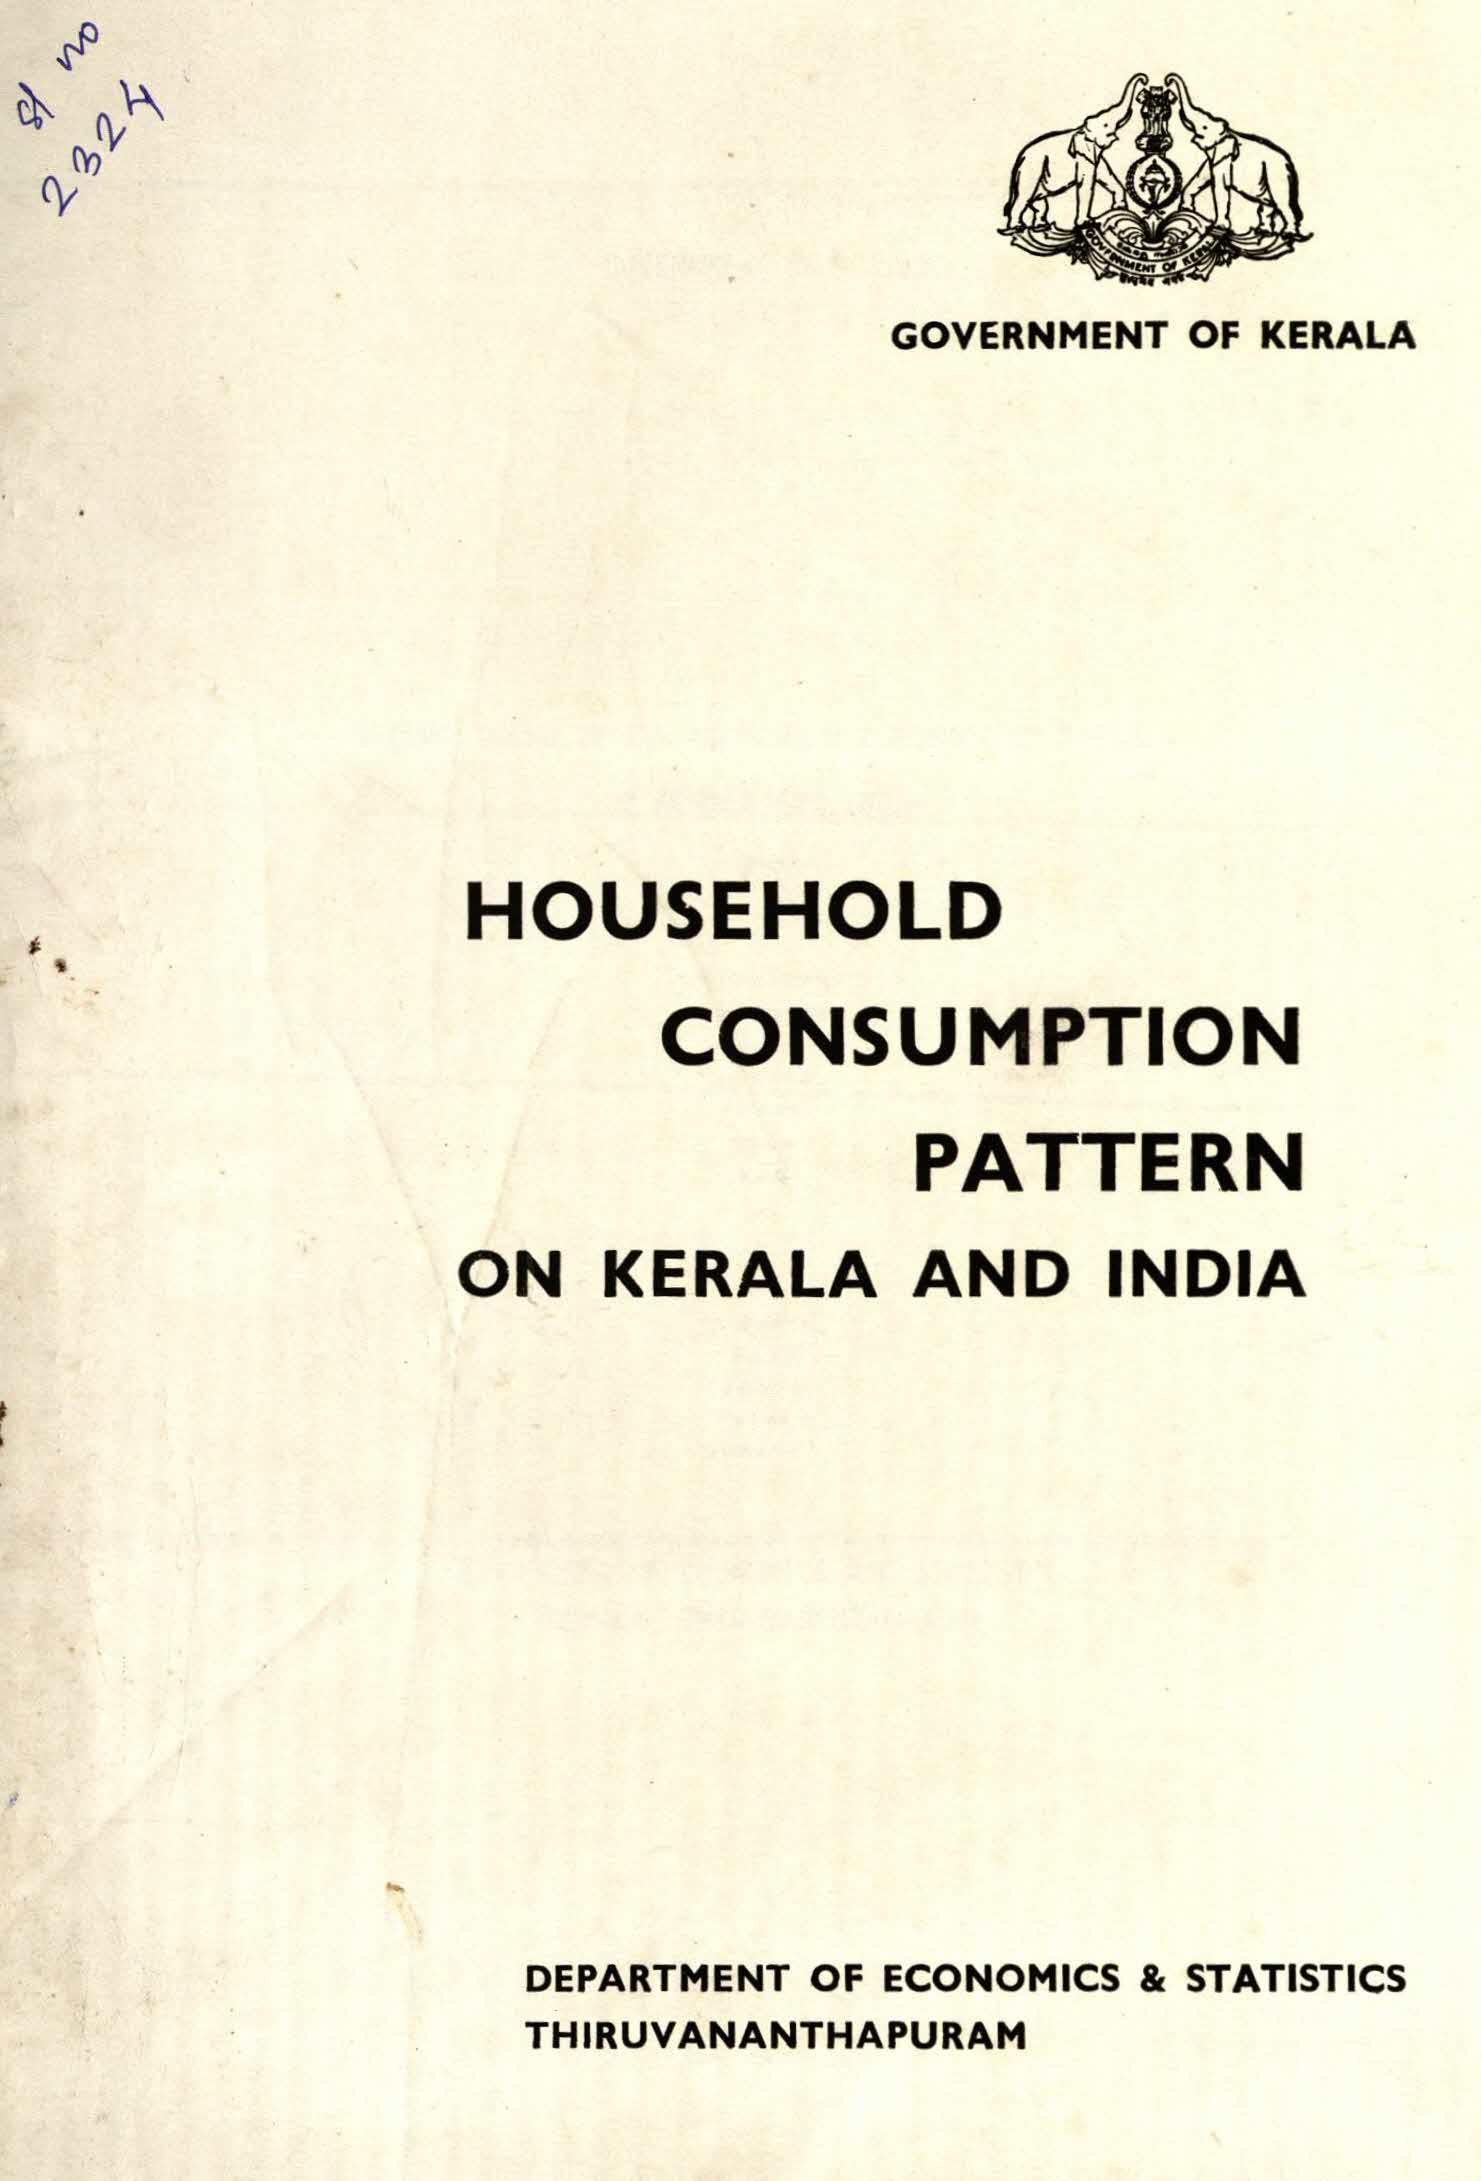 Household Consumption Pattern of Kerala and India 1996